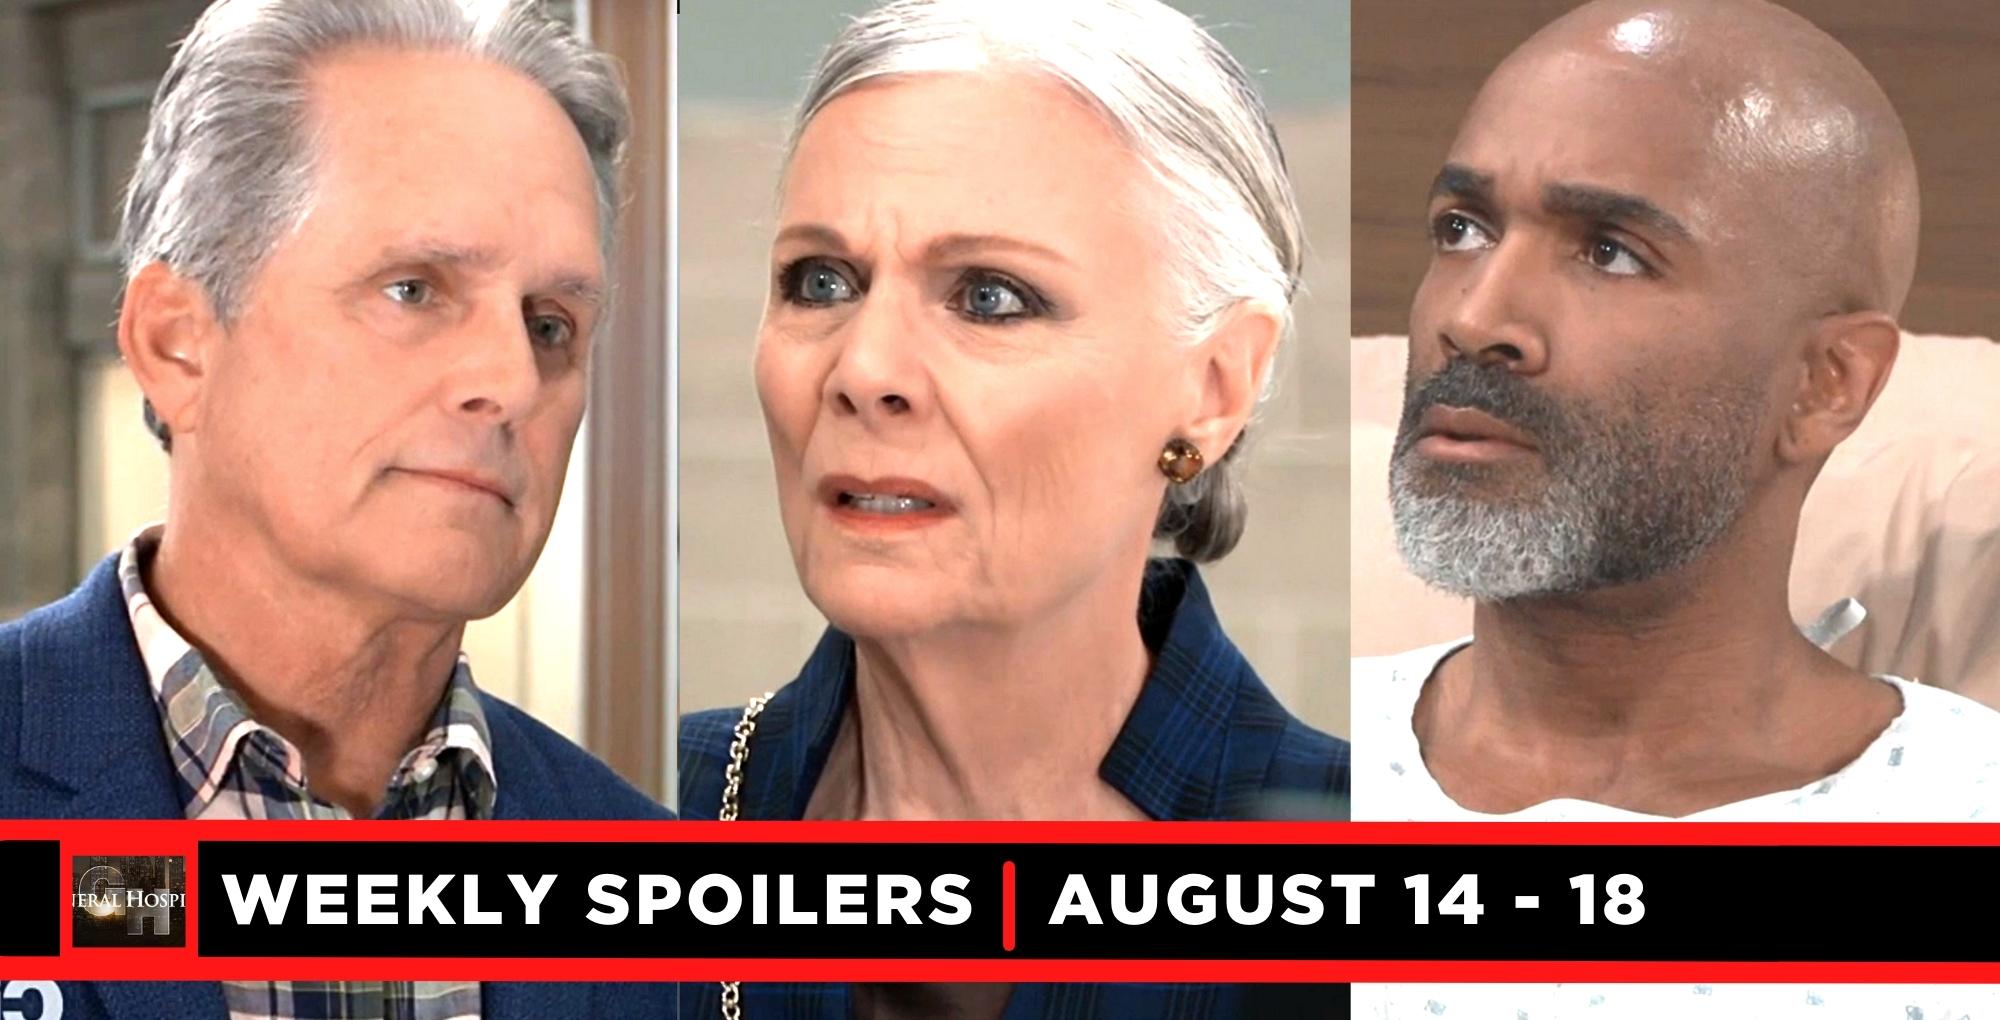 general hospital spoilers for august 14 – august 18, 2023, three images, gregory, tracy, and curtis.